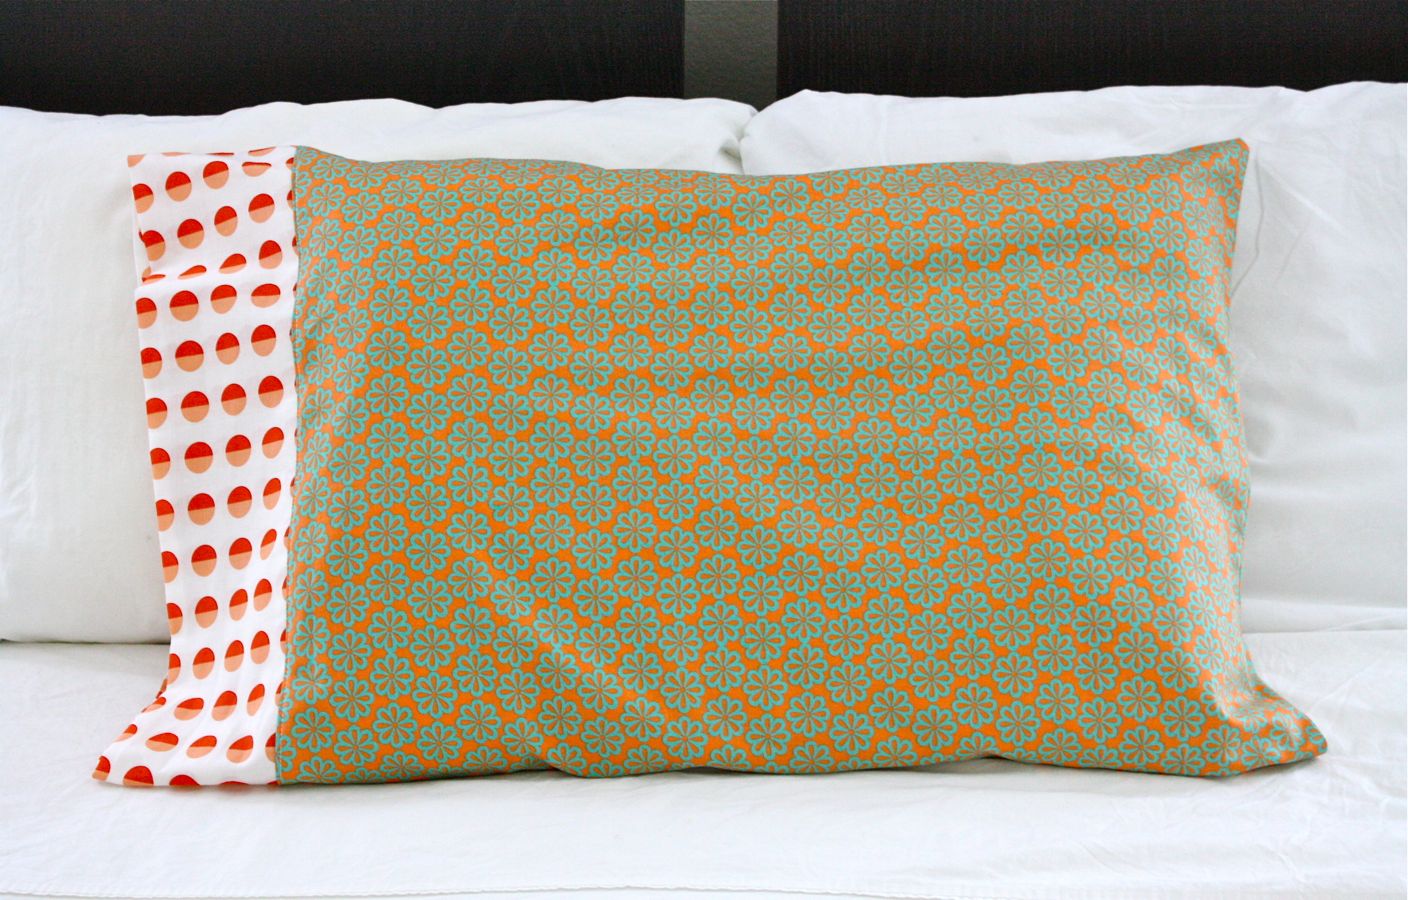 9-pillowcases-and-1-easy-tutorial-made-everyday